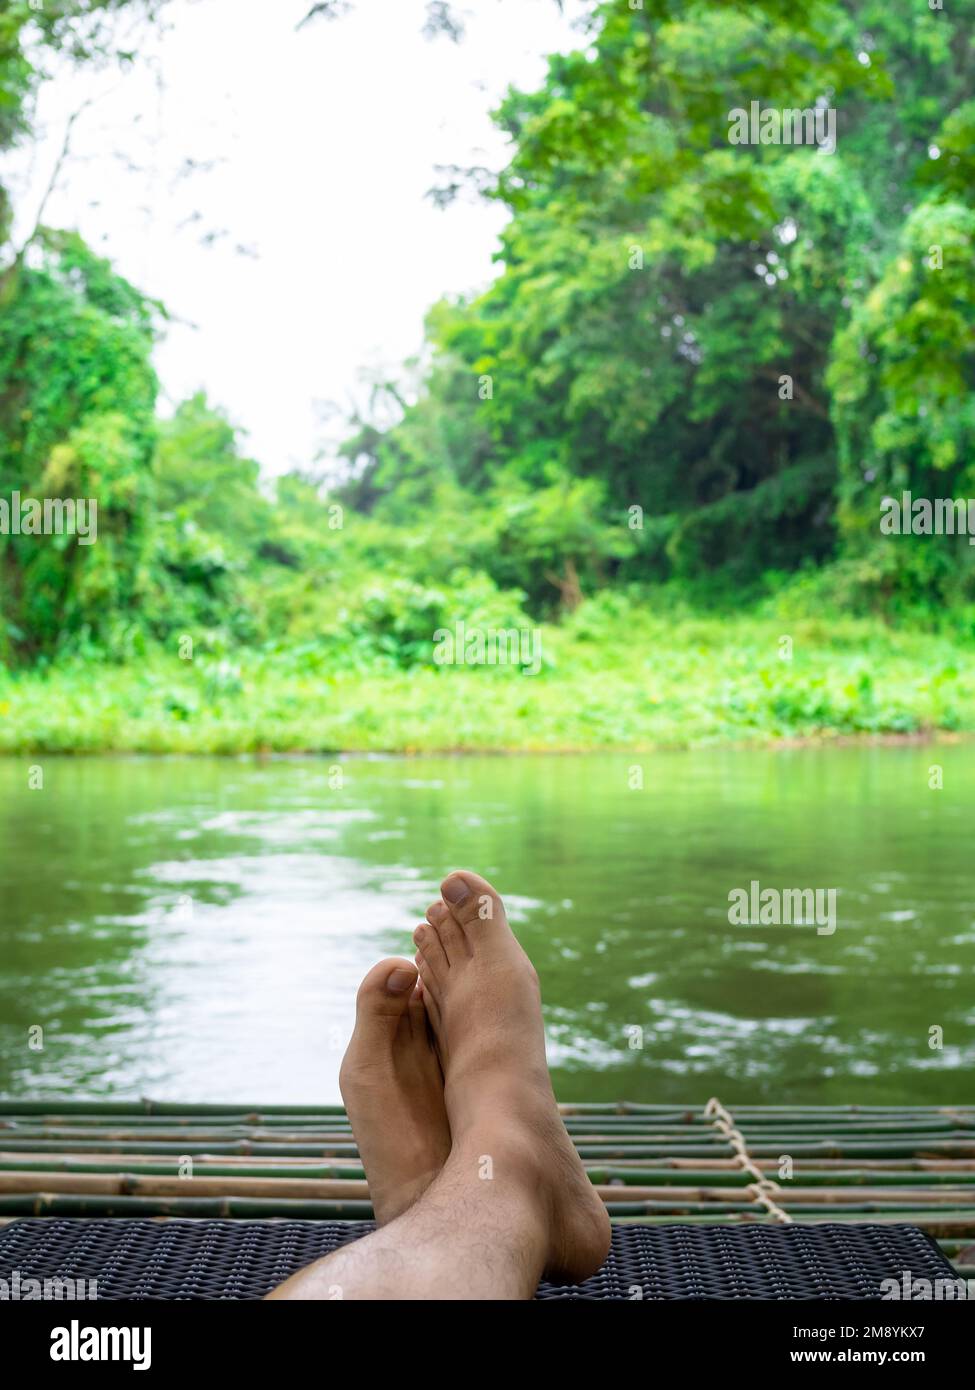 Take a break with relaxing time. The crossed feet of a person resting on a sunbed on a bamboo raft, watching streams in the calm peaceful green forest Stock Photo